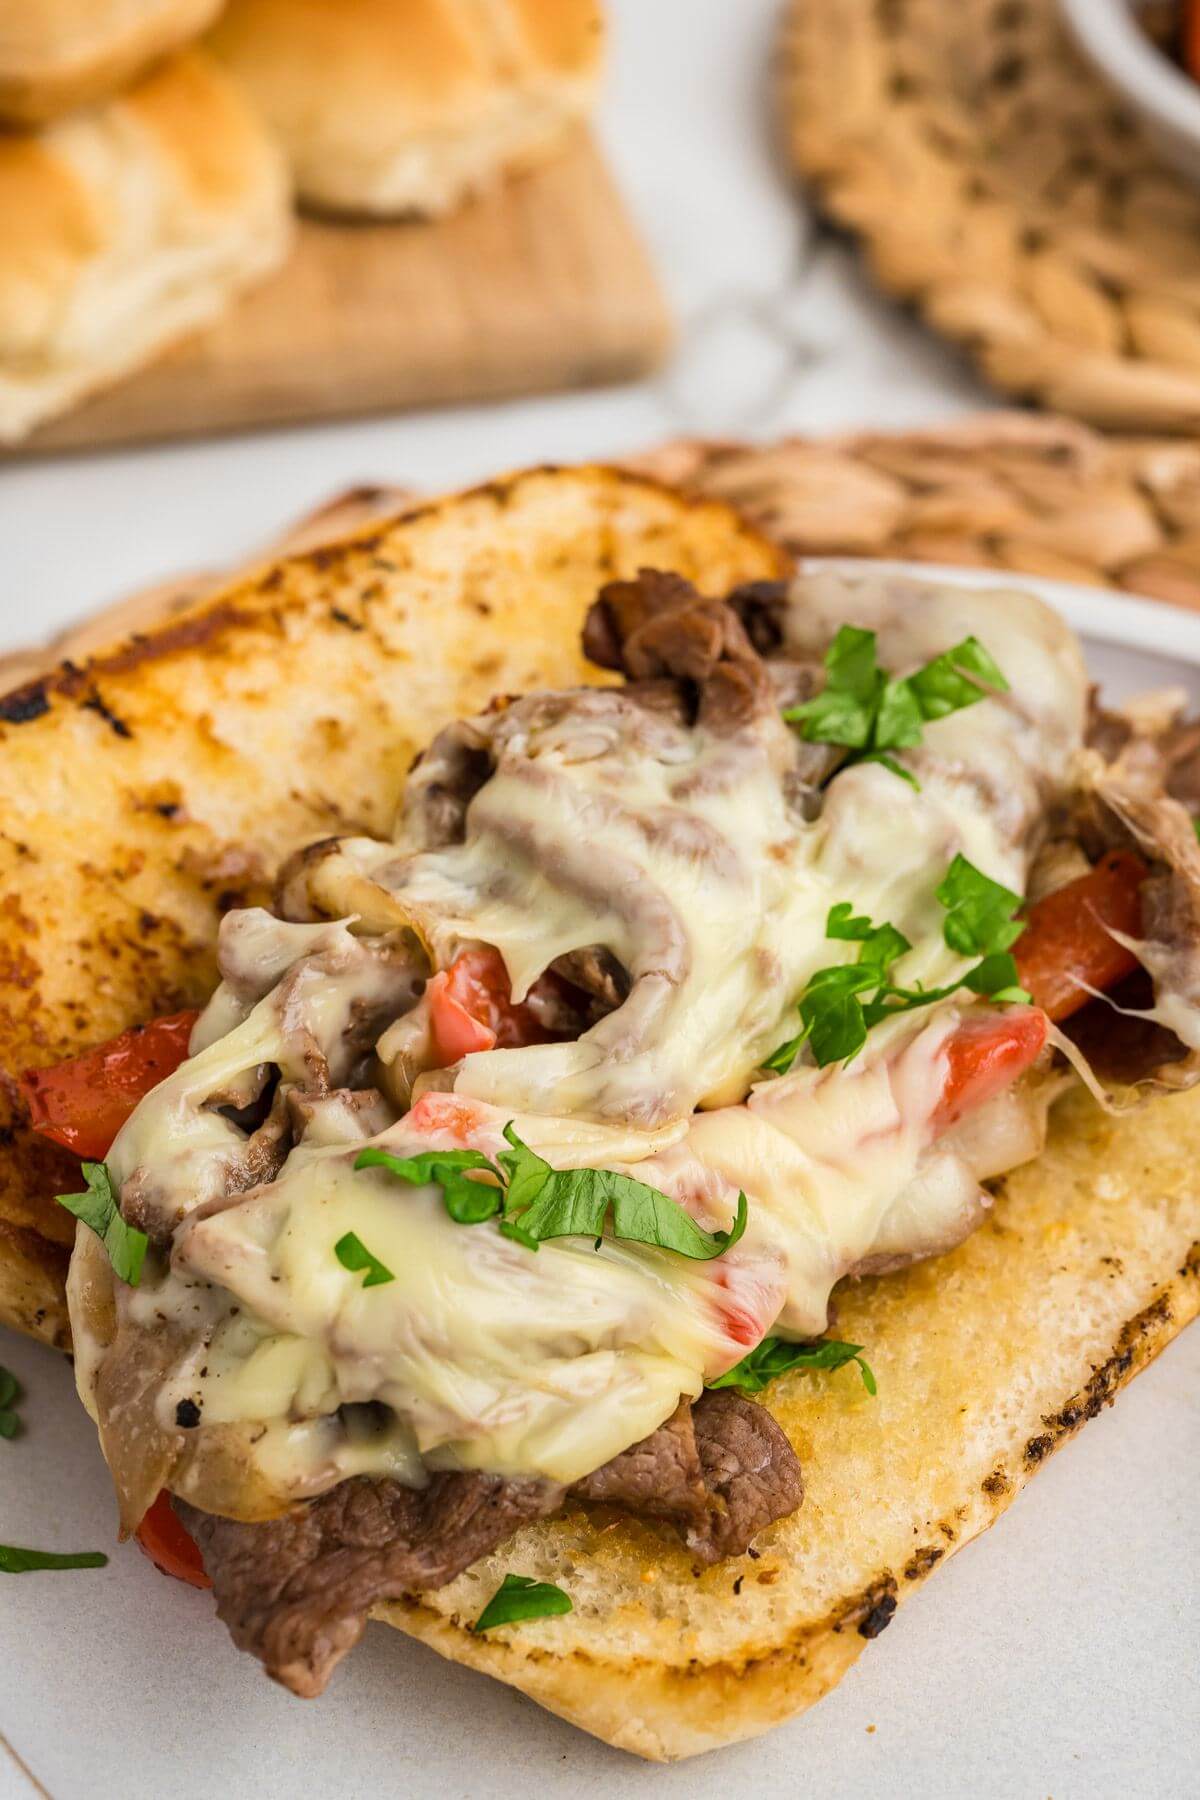 A toasted Hoagie roll holds layers of steak, gooey white cheese, and veggies.